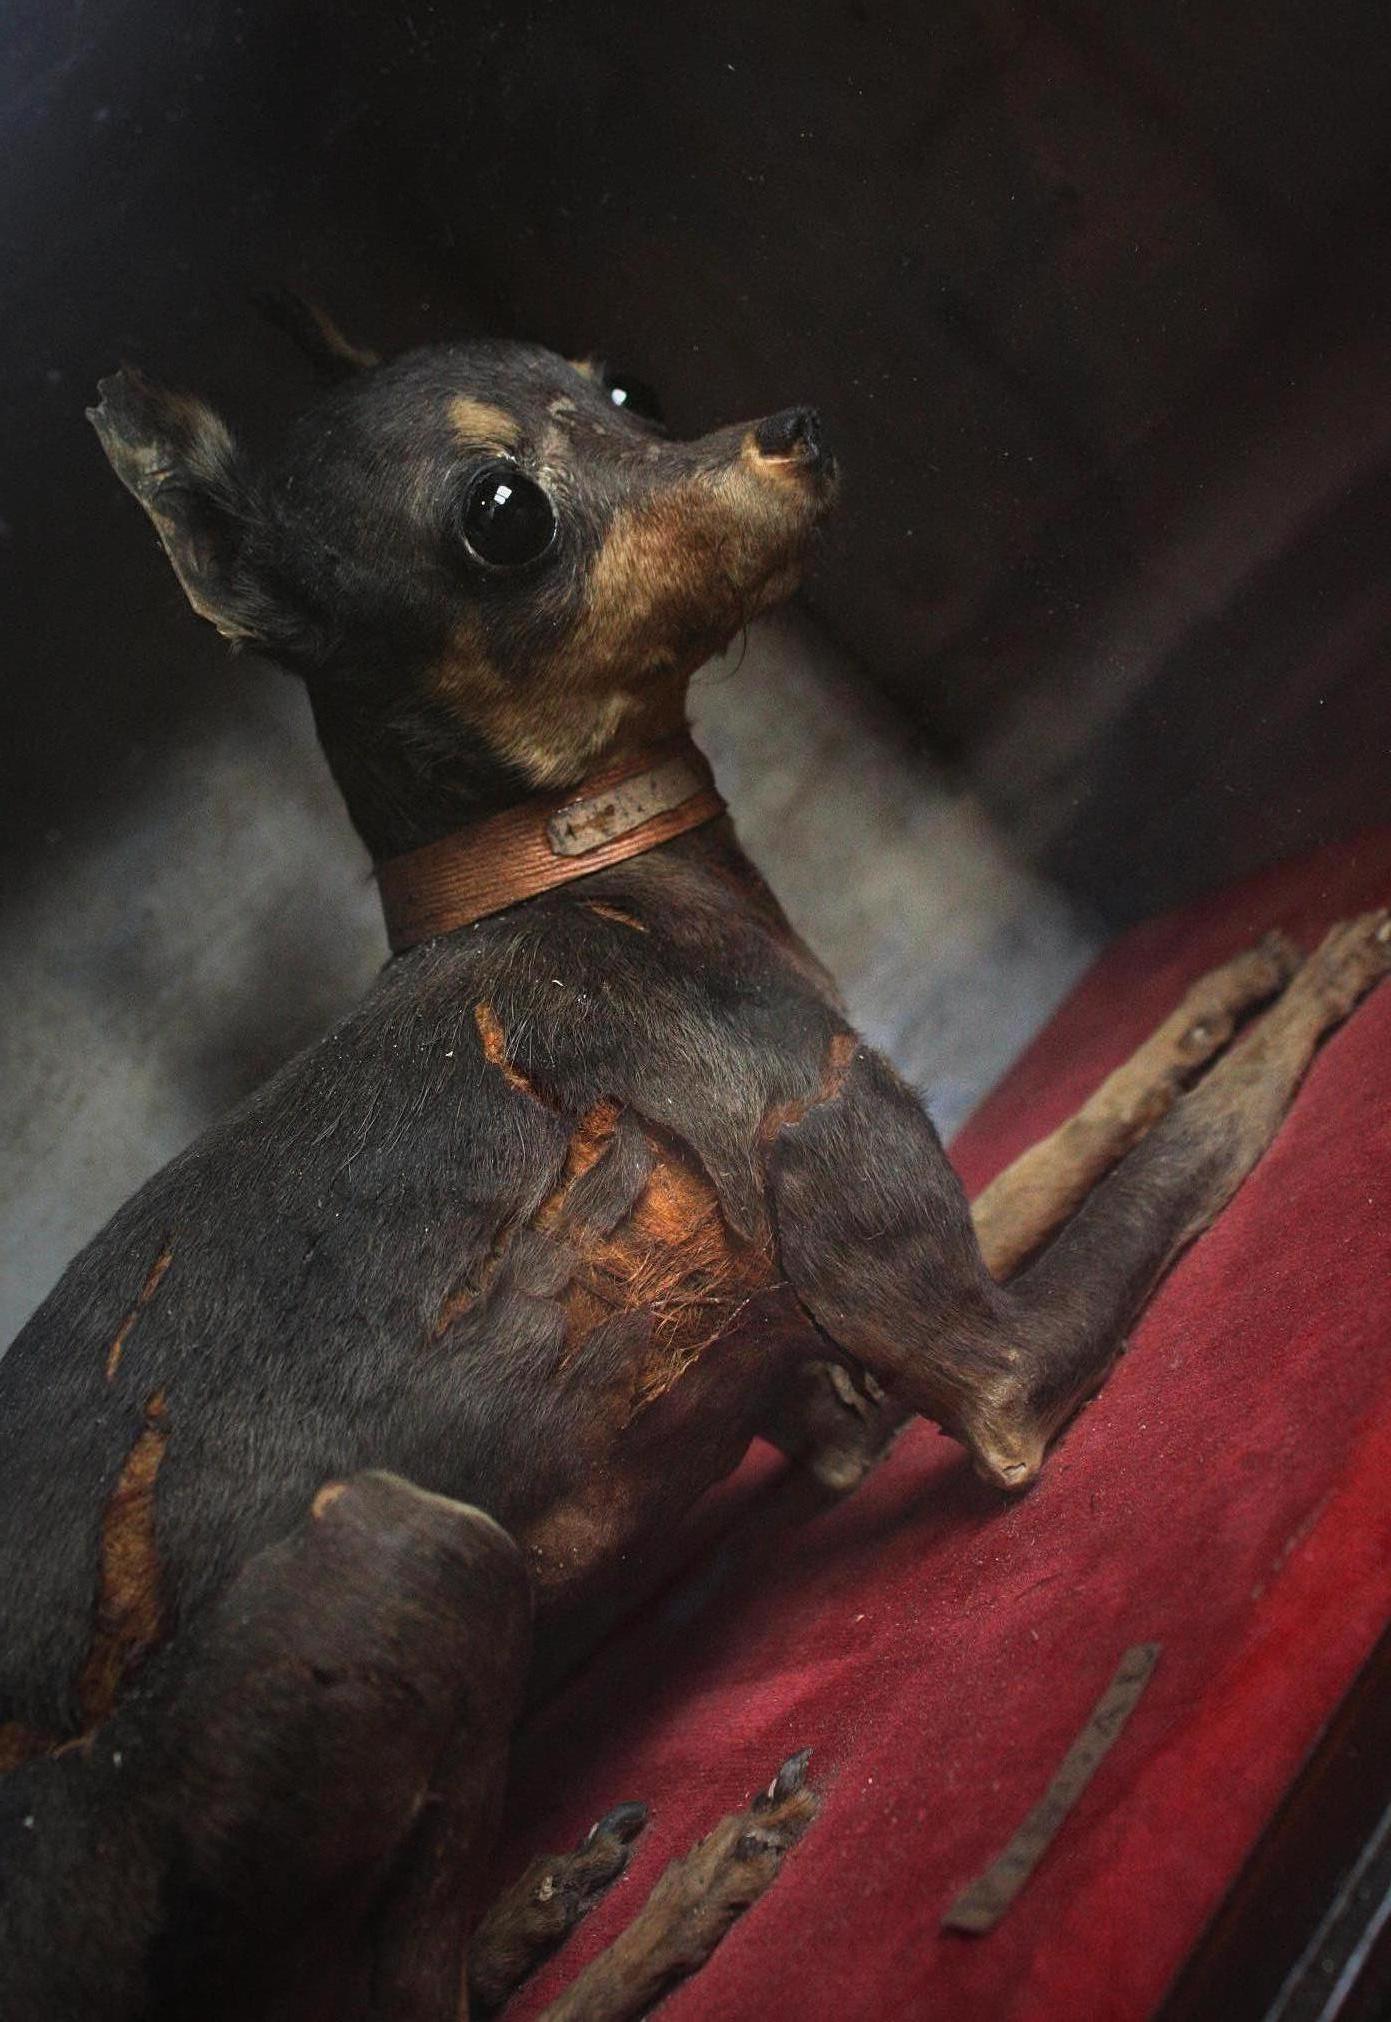 A Fine Victorian taxidermy specimen of an apple head Chihuahua, housed in its original case.

The Chihuahua sits on a red velvet base with a watercolor back drop, with its original name label in the foreground.

He also has his original collar